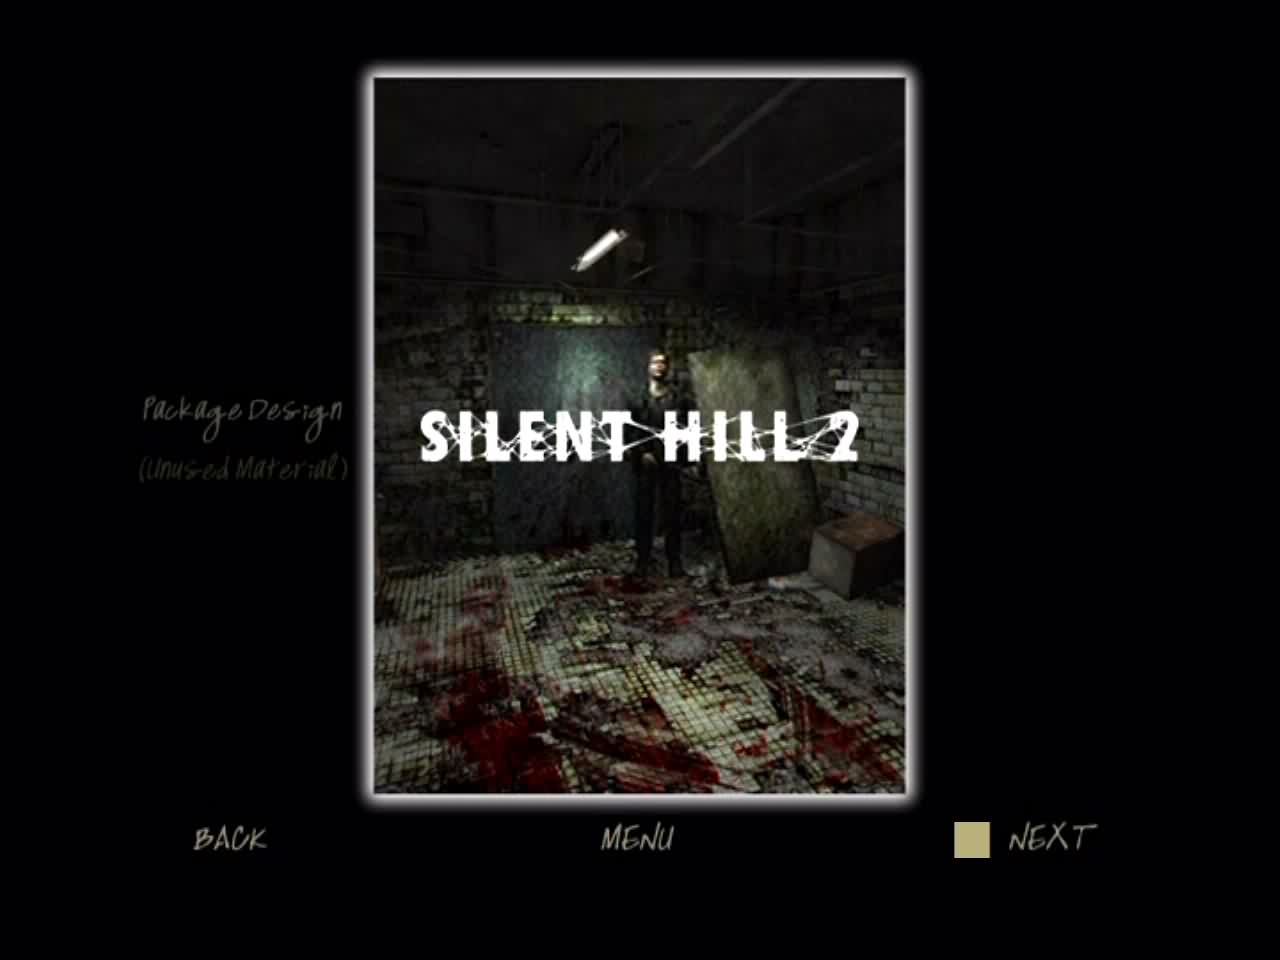 silent hill 2 book of lost memories download free